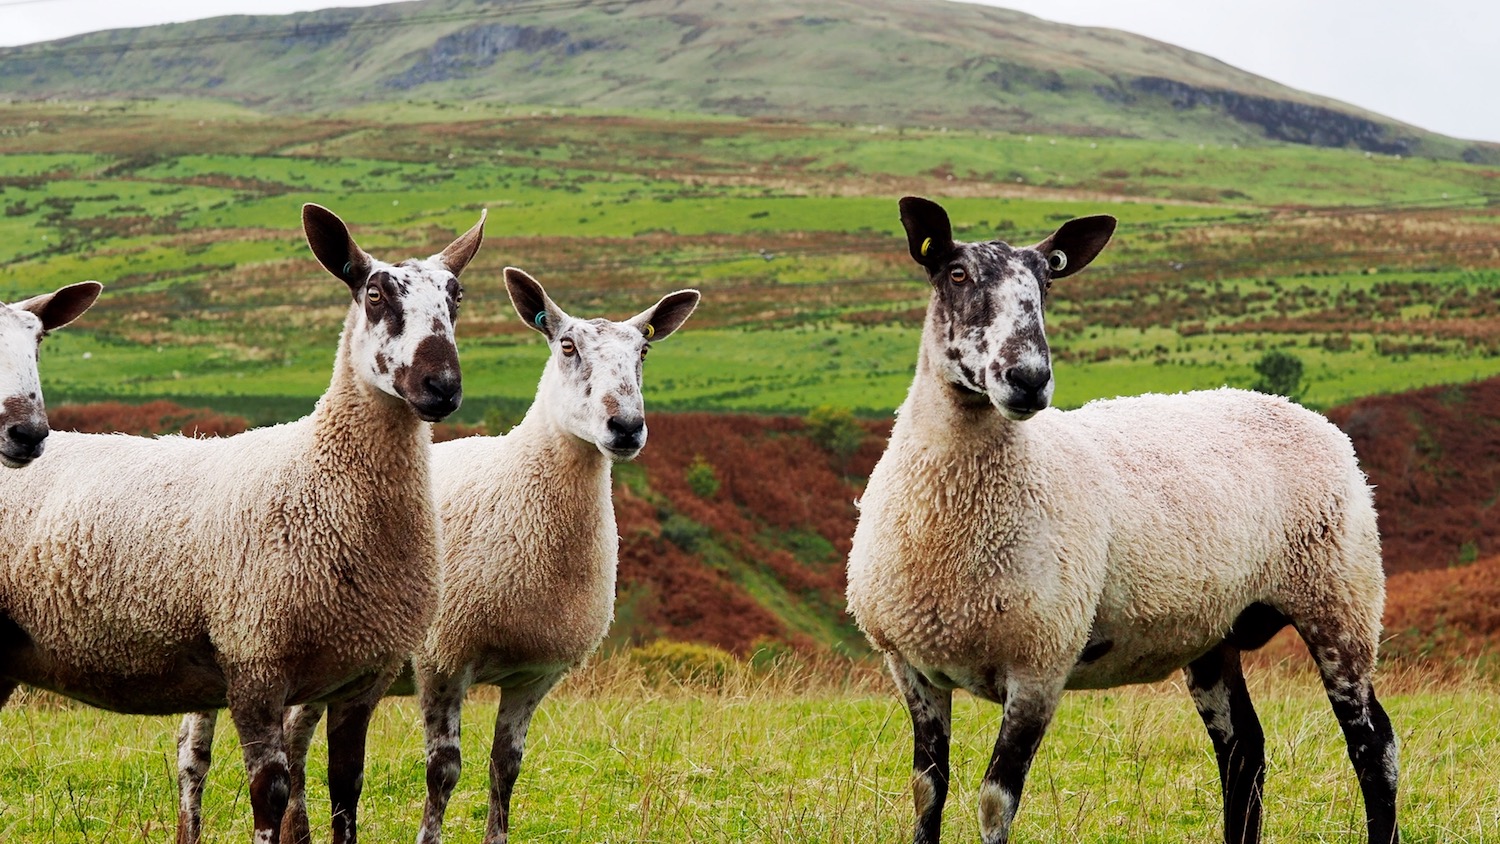 Bluefaced Leicester sheep. © Campaign for Wool